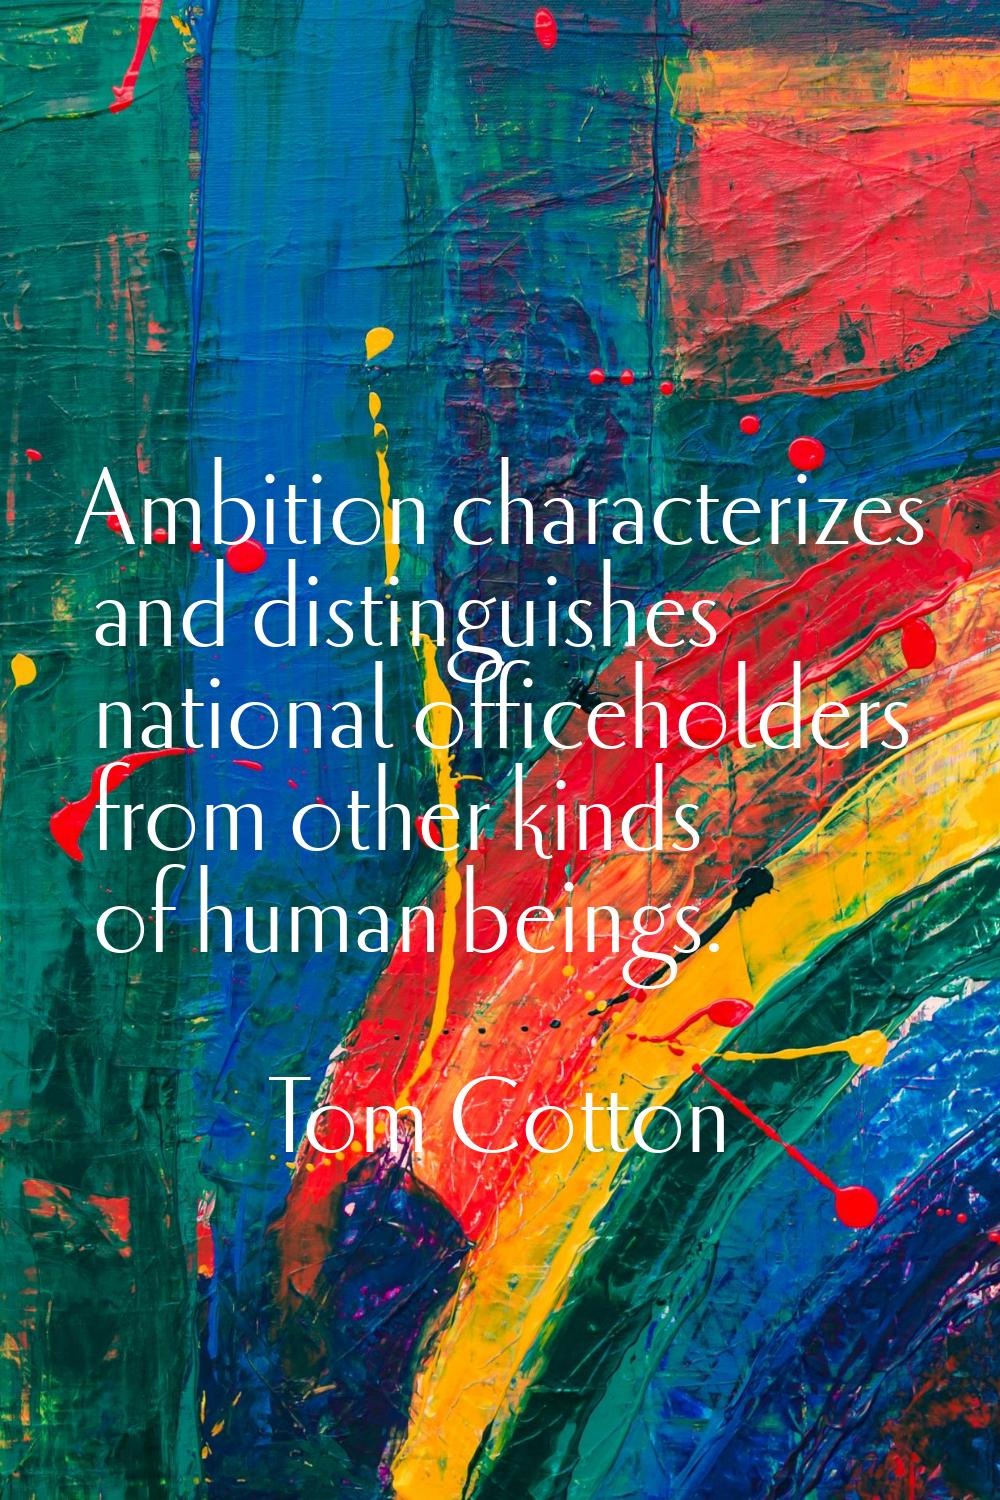 Ambition characterizes and distinguishes national officeholders from other kinds of human beings.